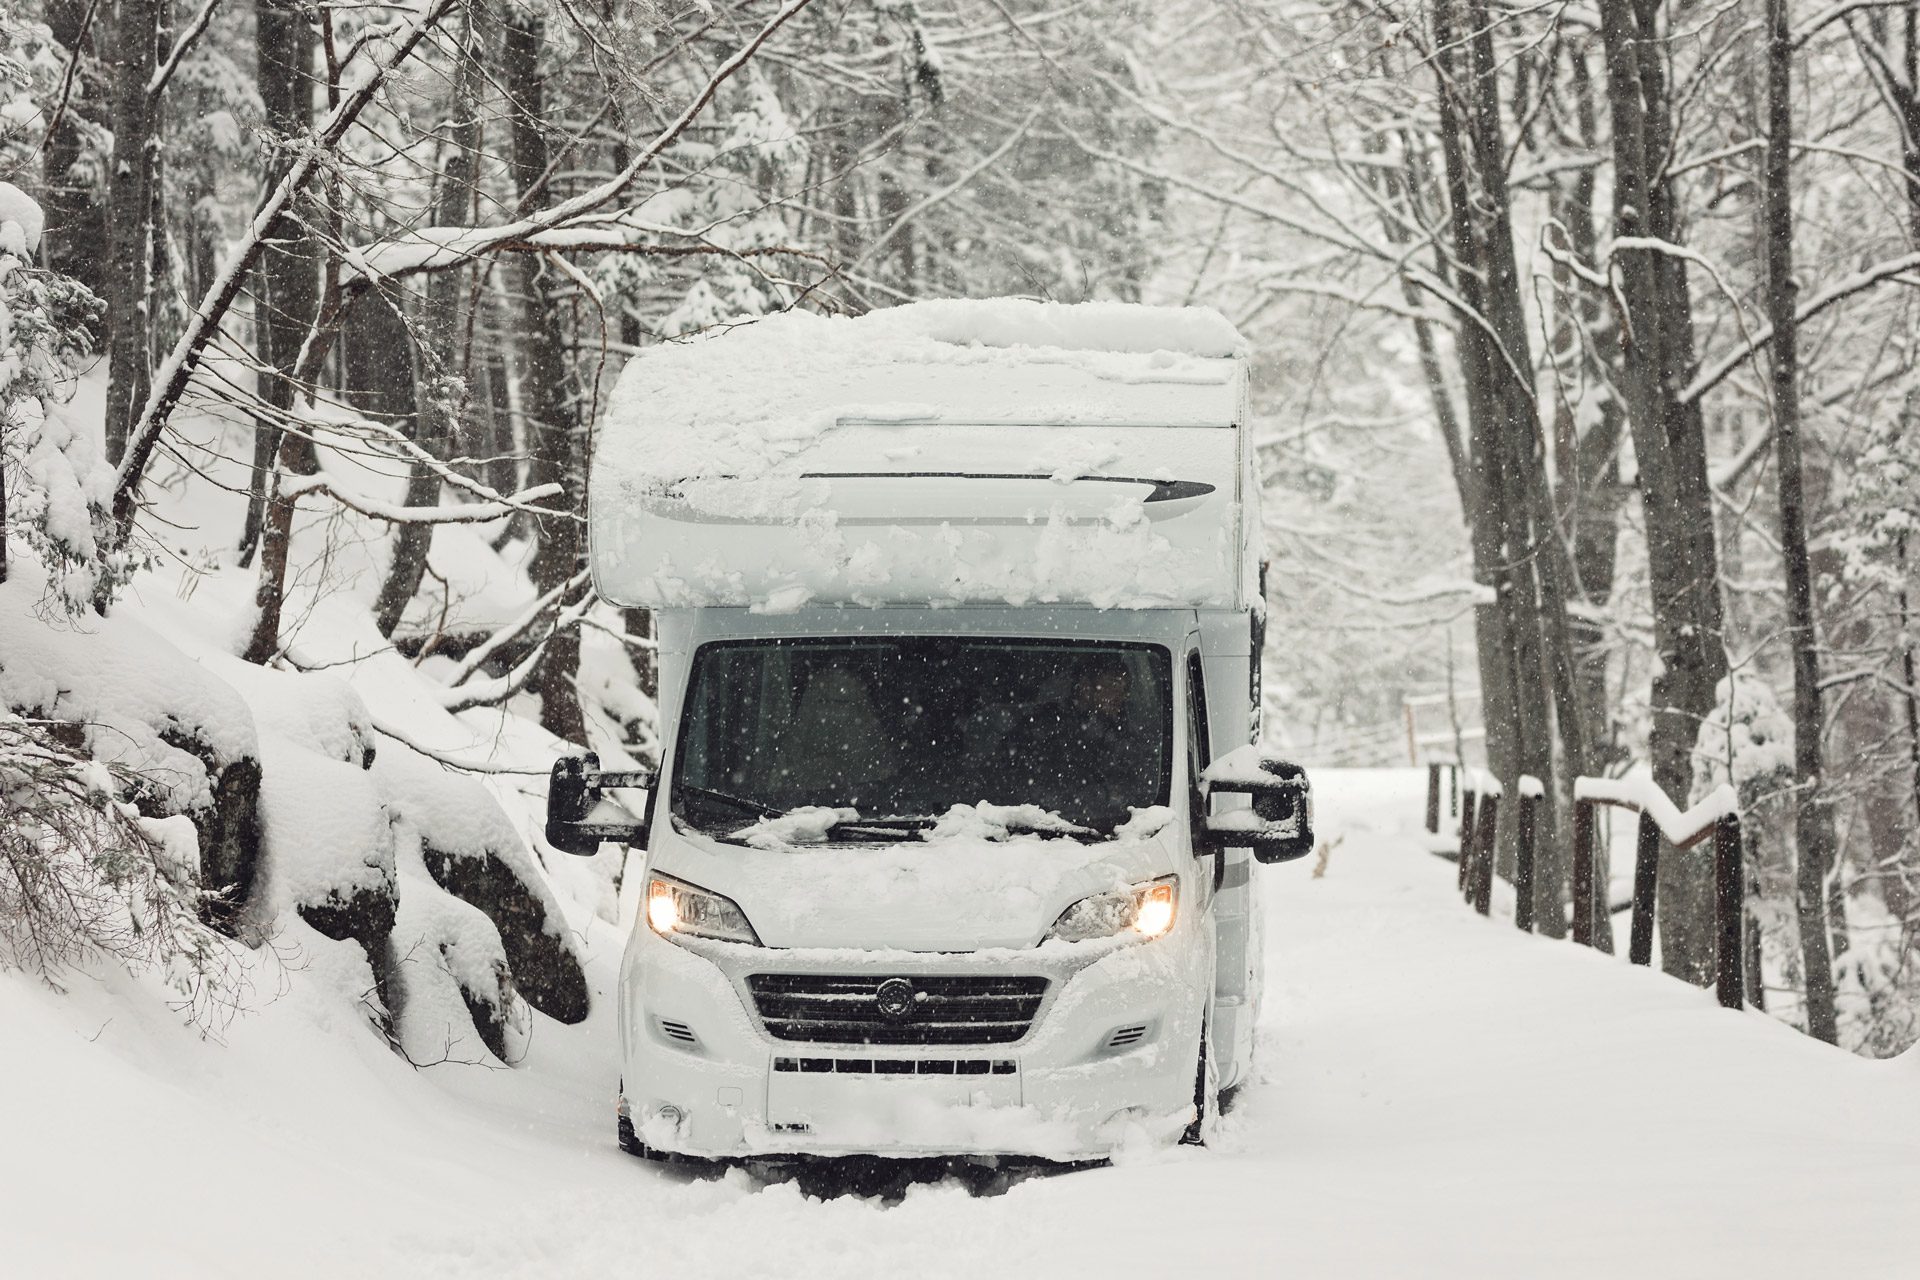 motorhome in wintry conditions